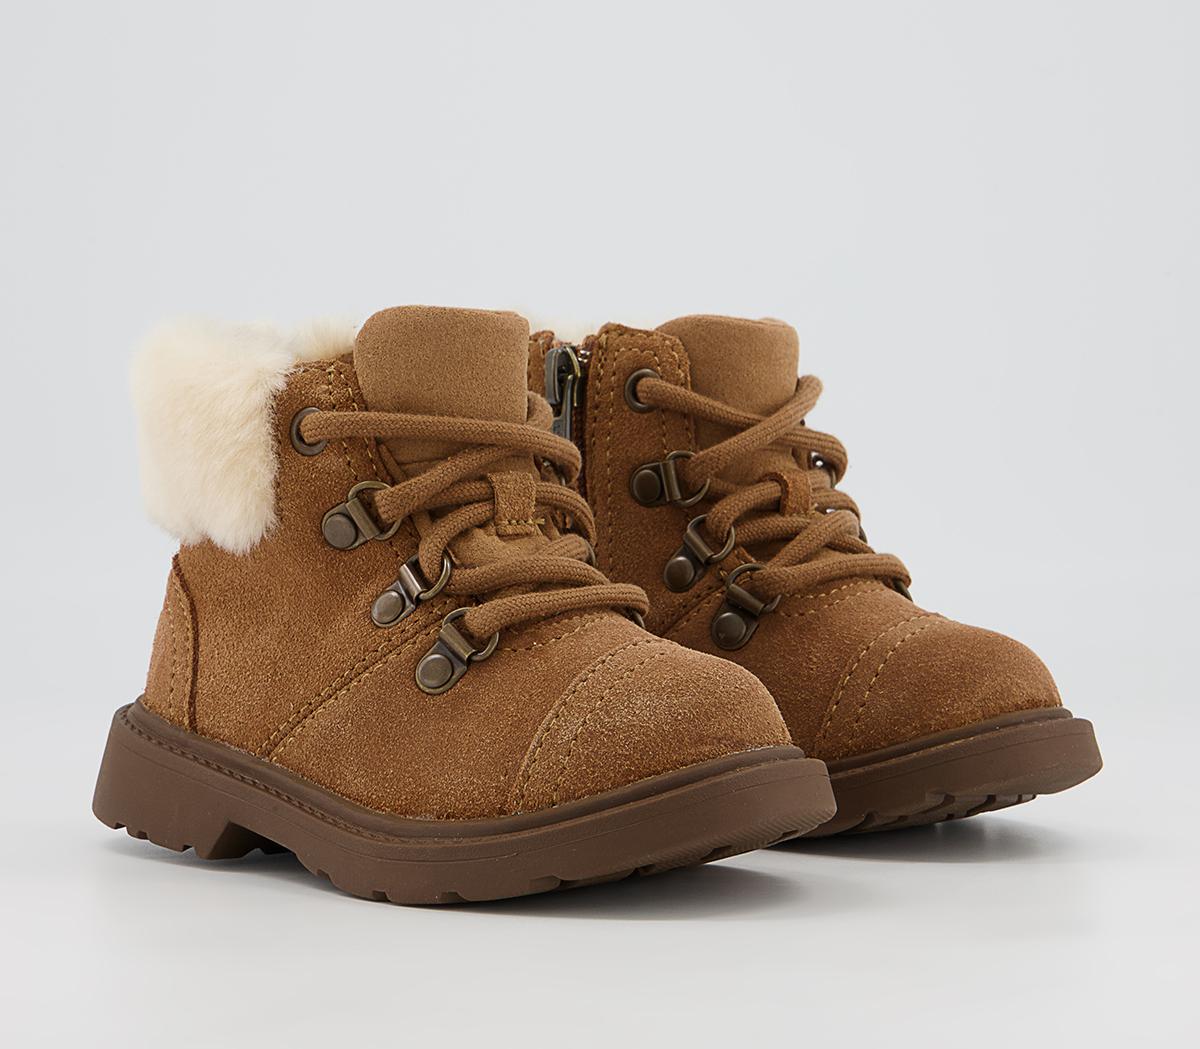 UGG Kids Azell Hiker Infant Boots Chestnut Suede In Tan, 10 Youth